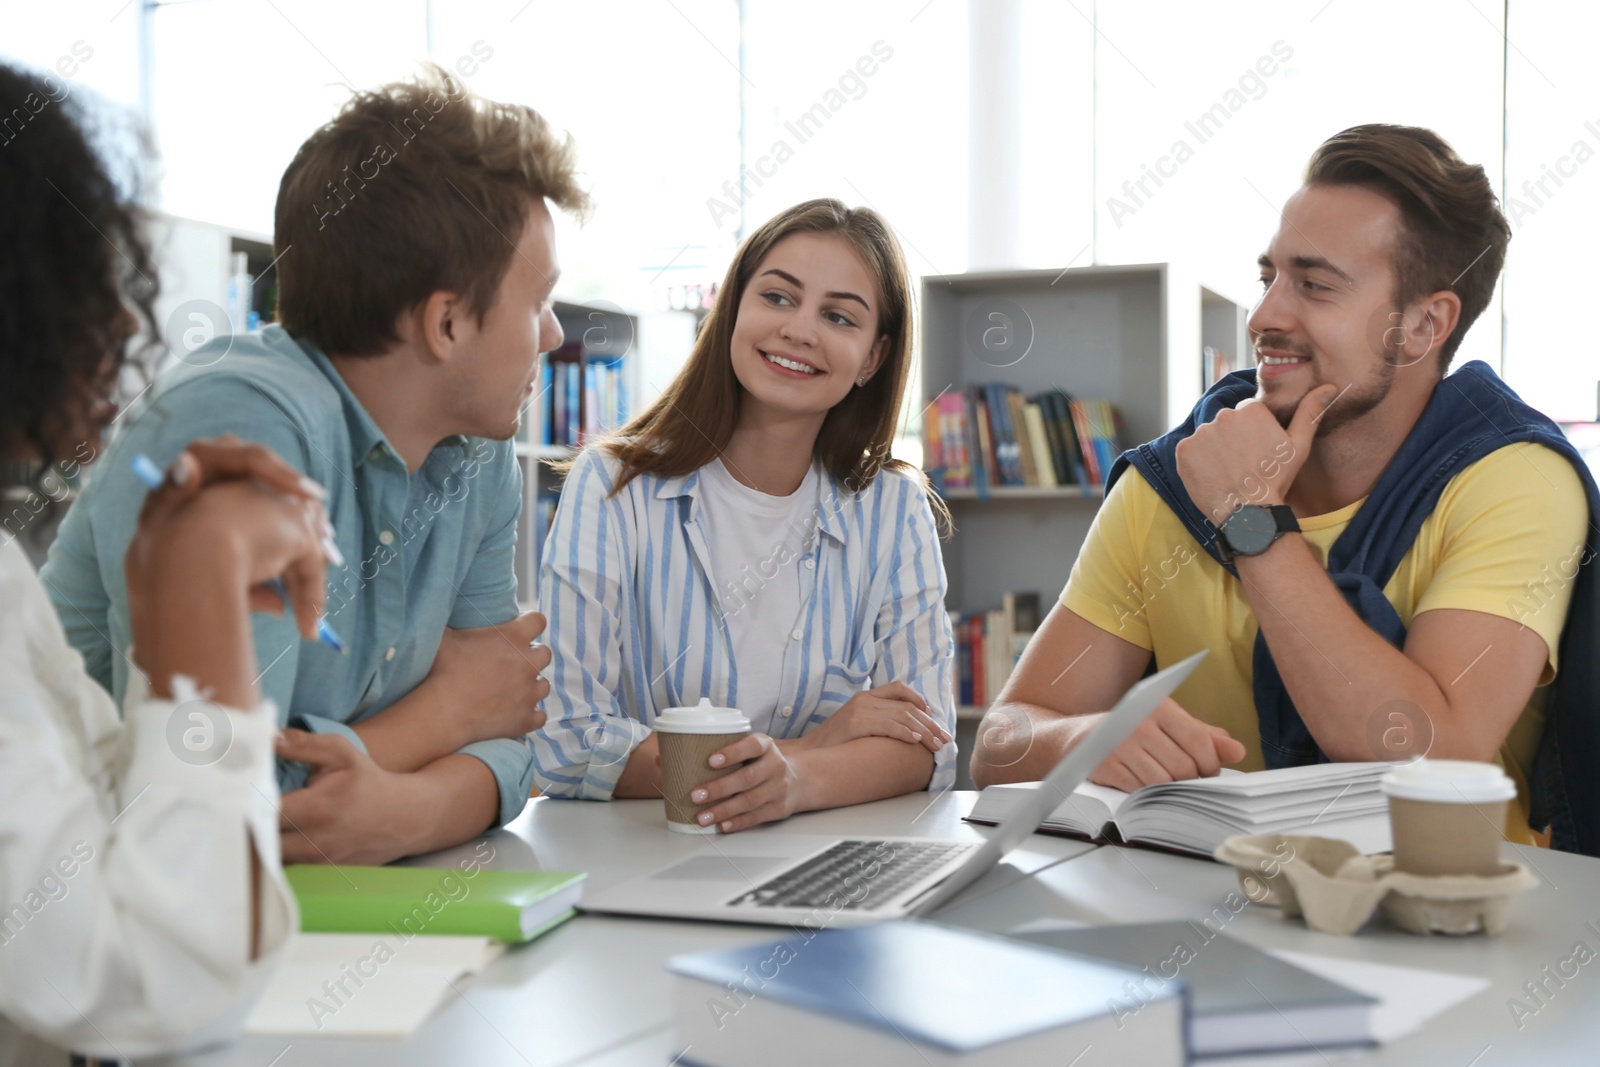 Photo of Group of young people studying at table in library